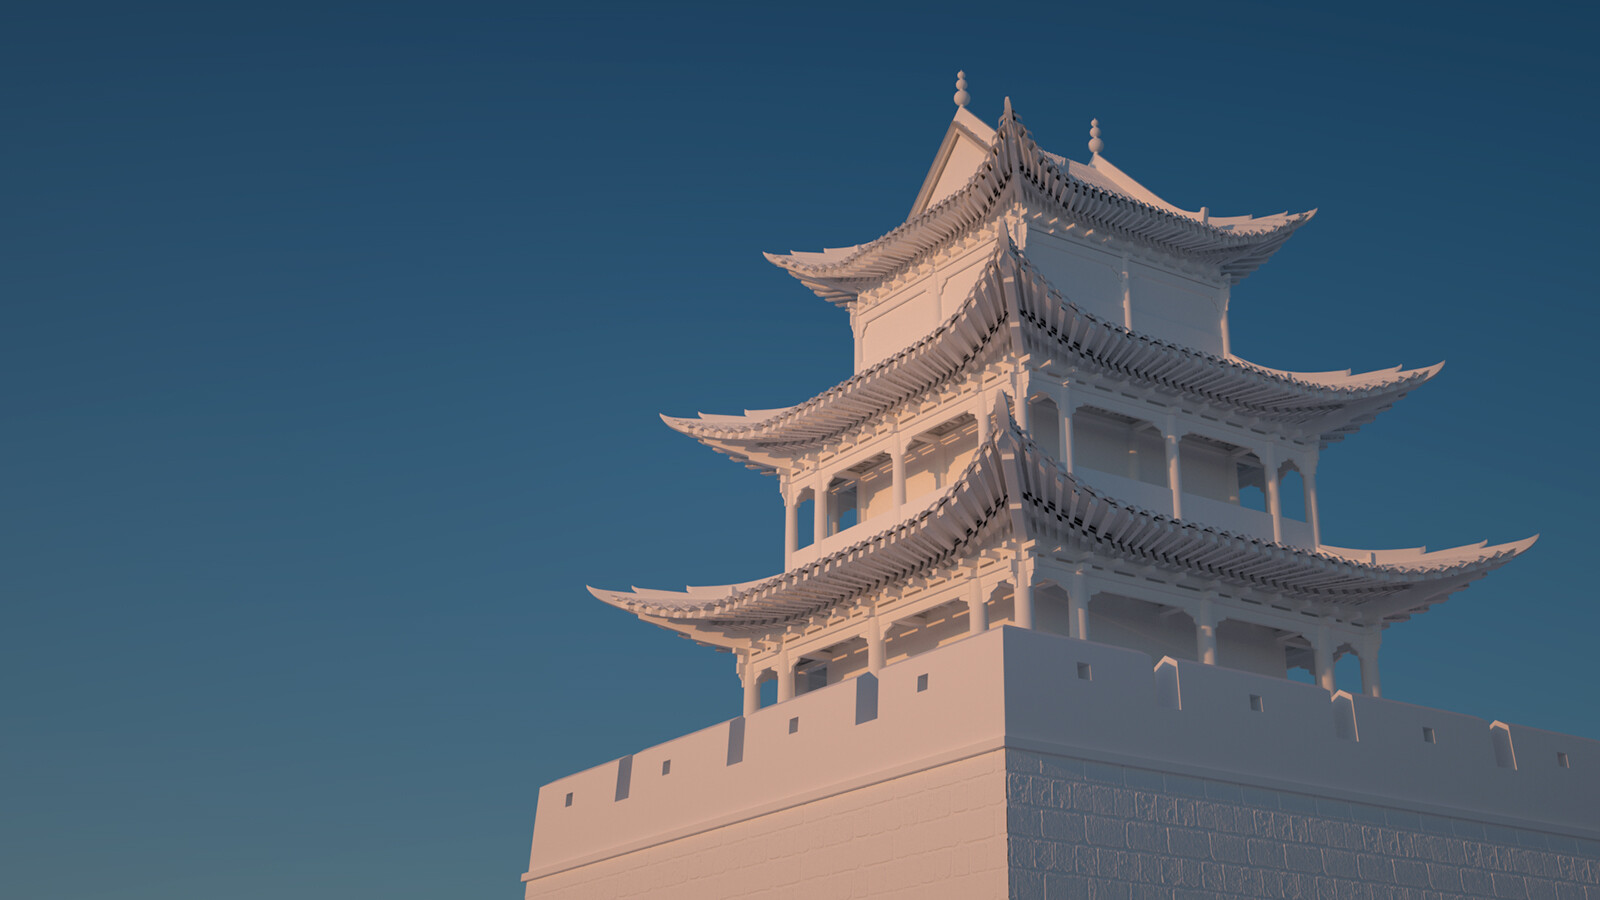 fortress 3d model I prepared for this assignment